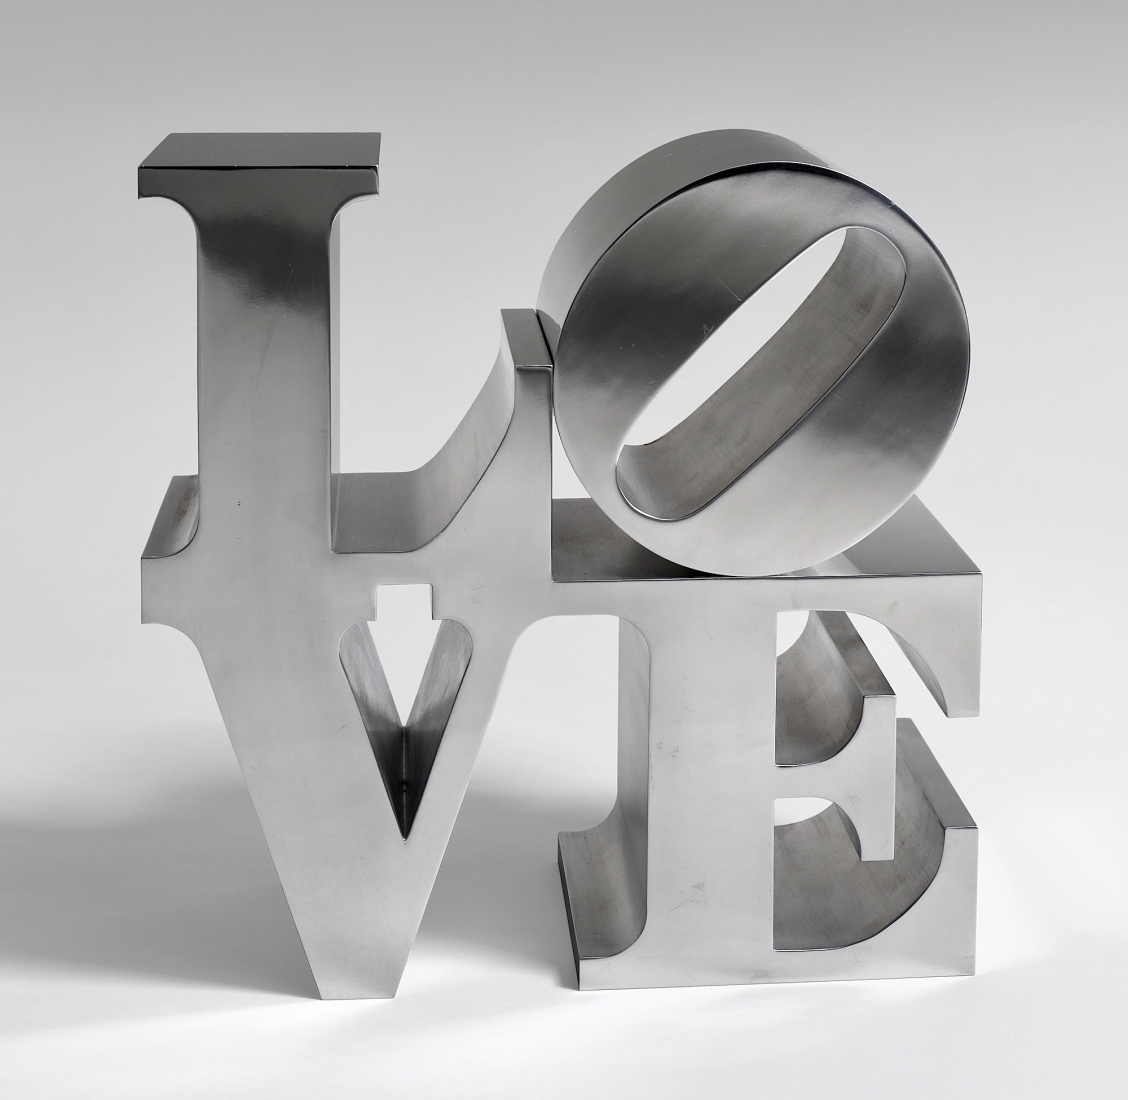 Robert Indiana's aluminum, hand-cut and mirror-finished LOVE sculpture